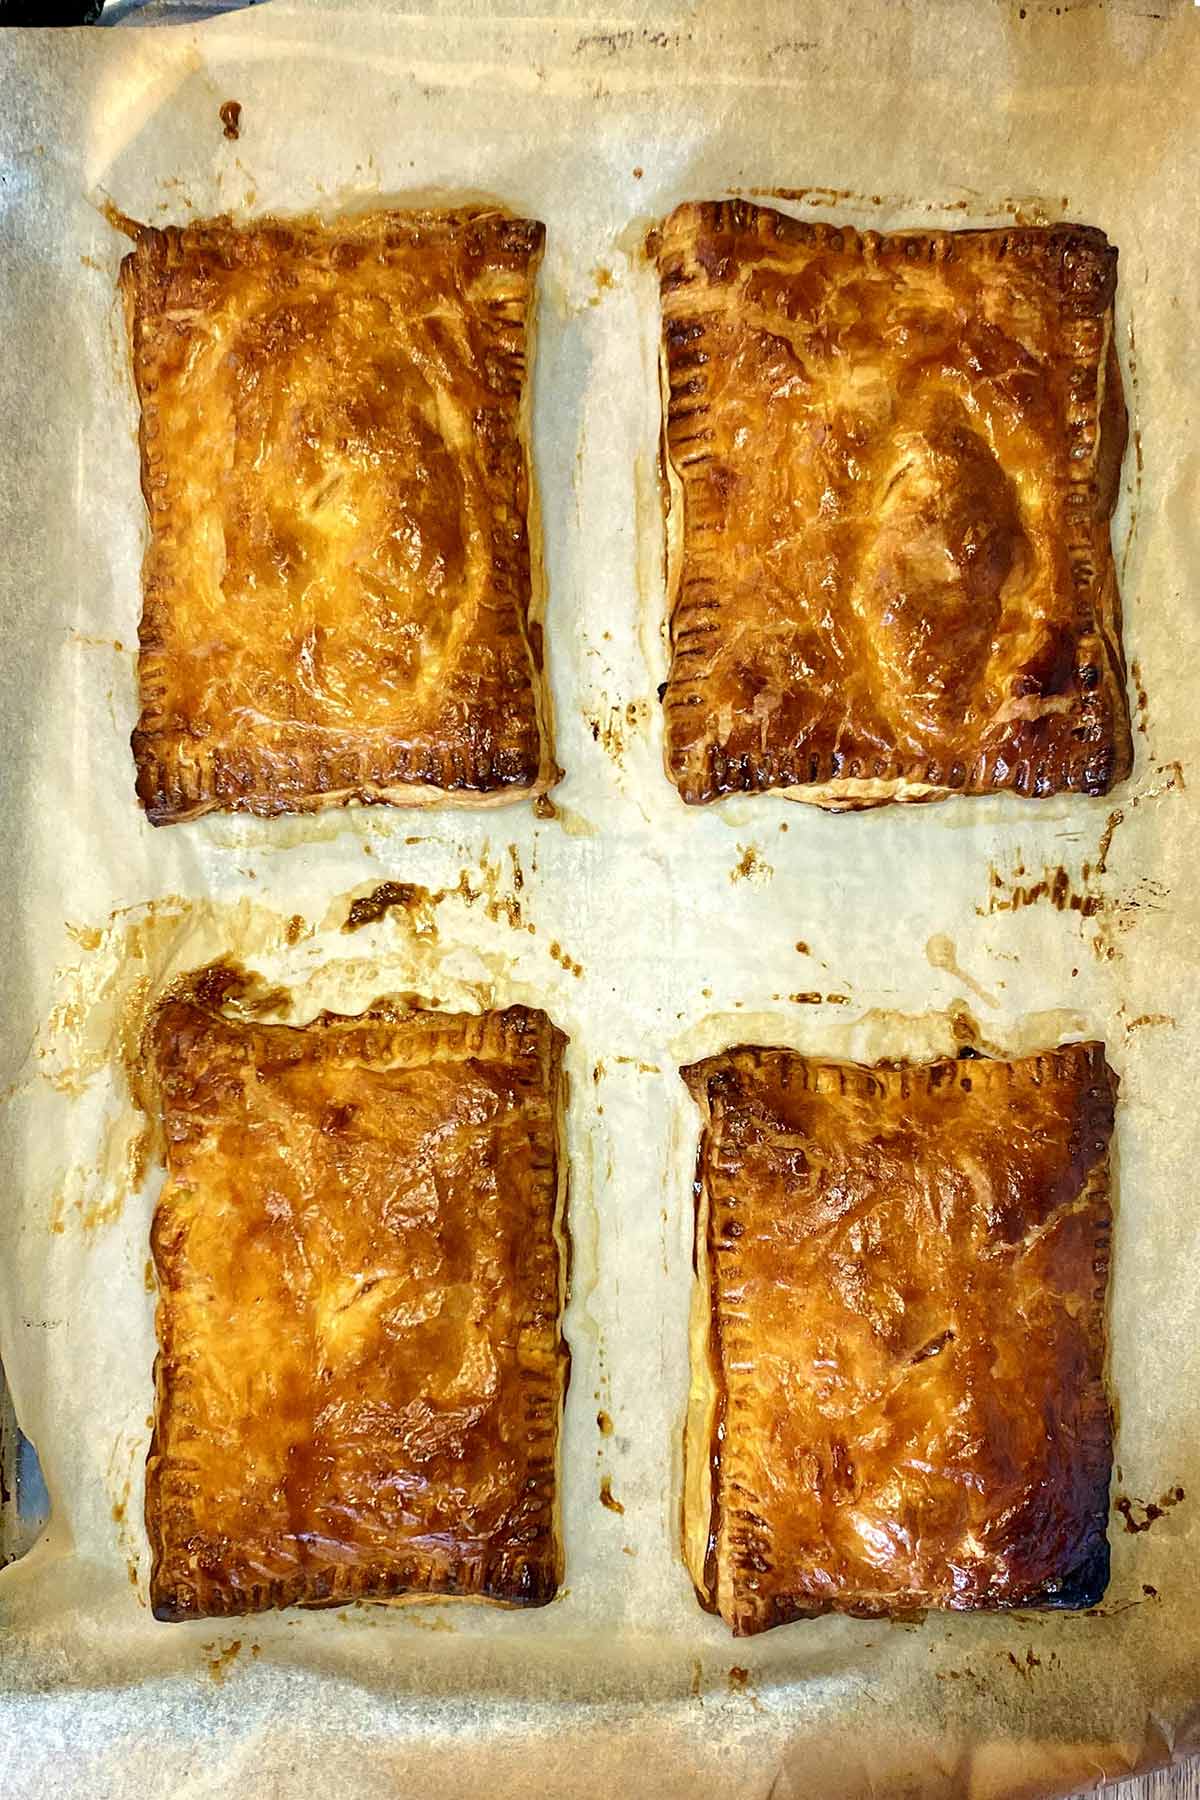 Four golden brown cheese and onion pasties on a baking tray.